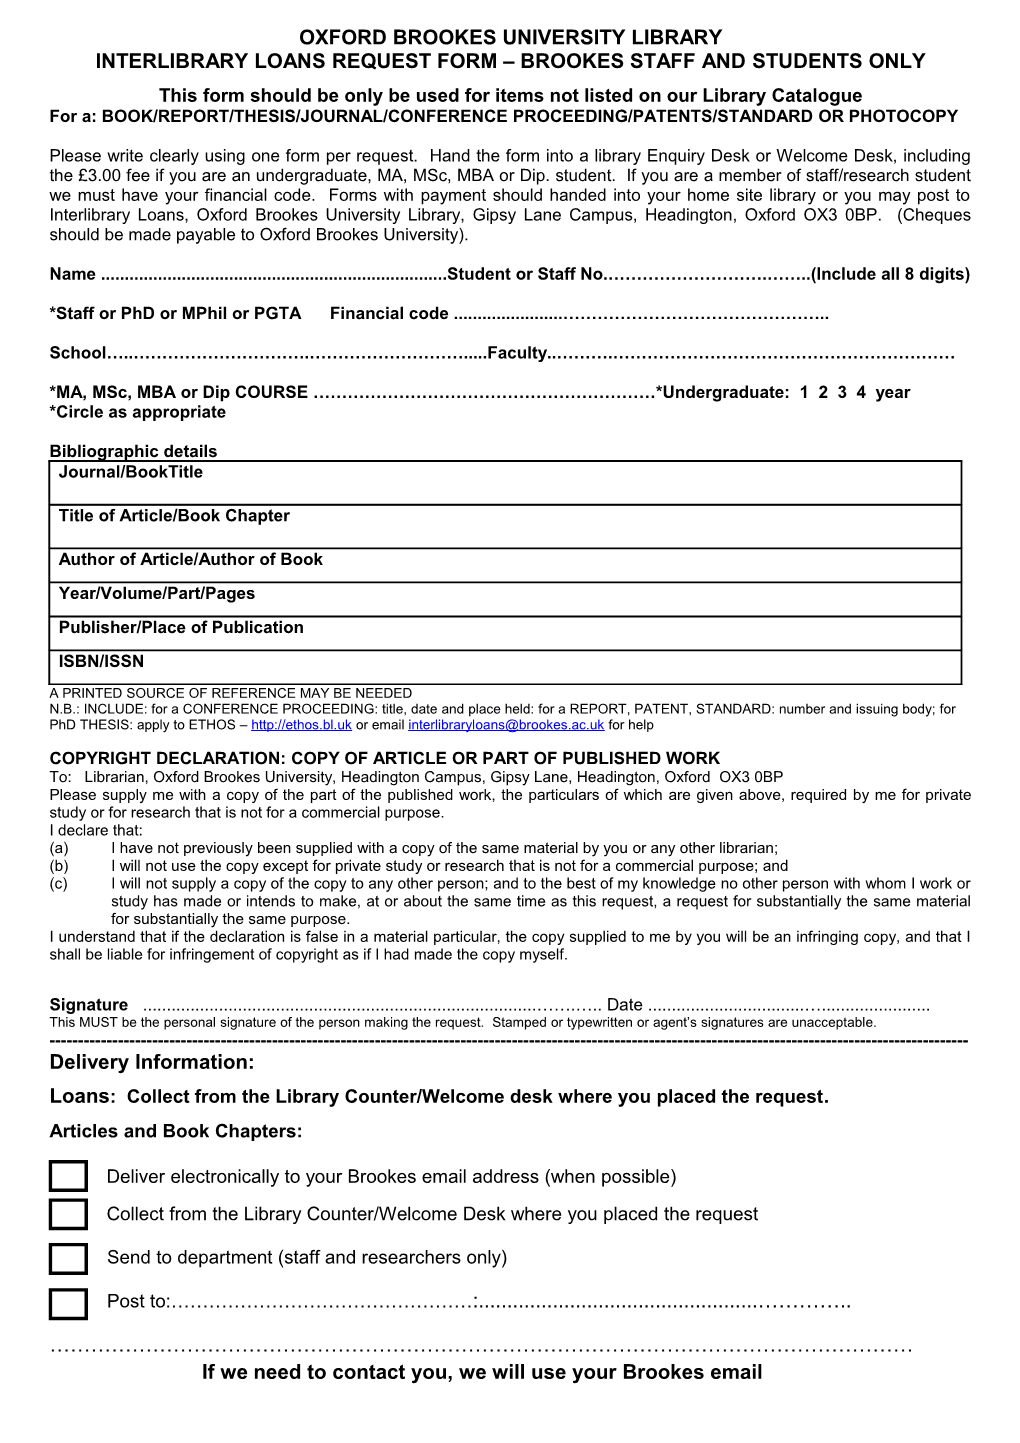 Interlibrary Loan Request Form